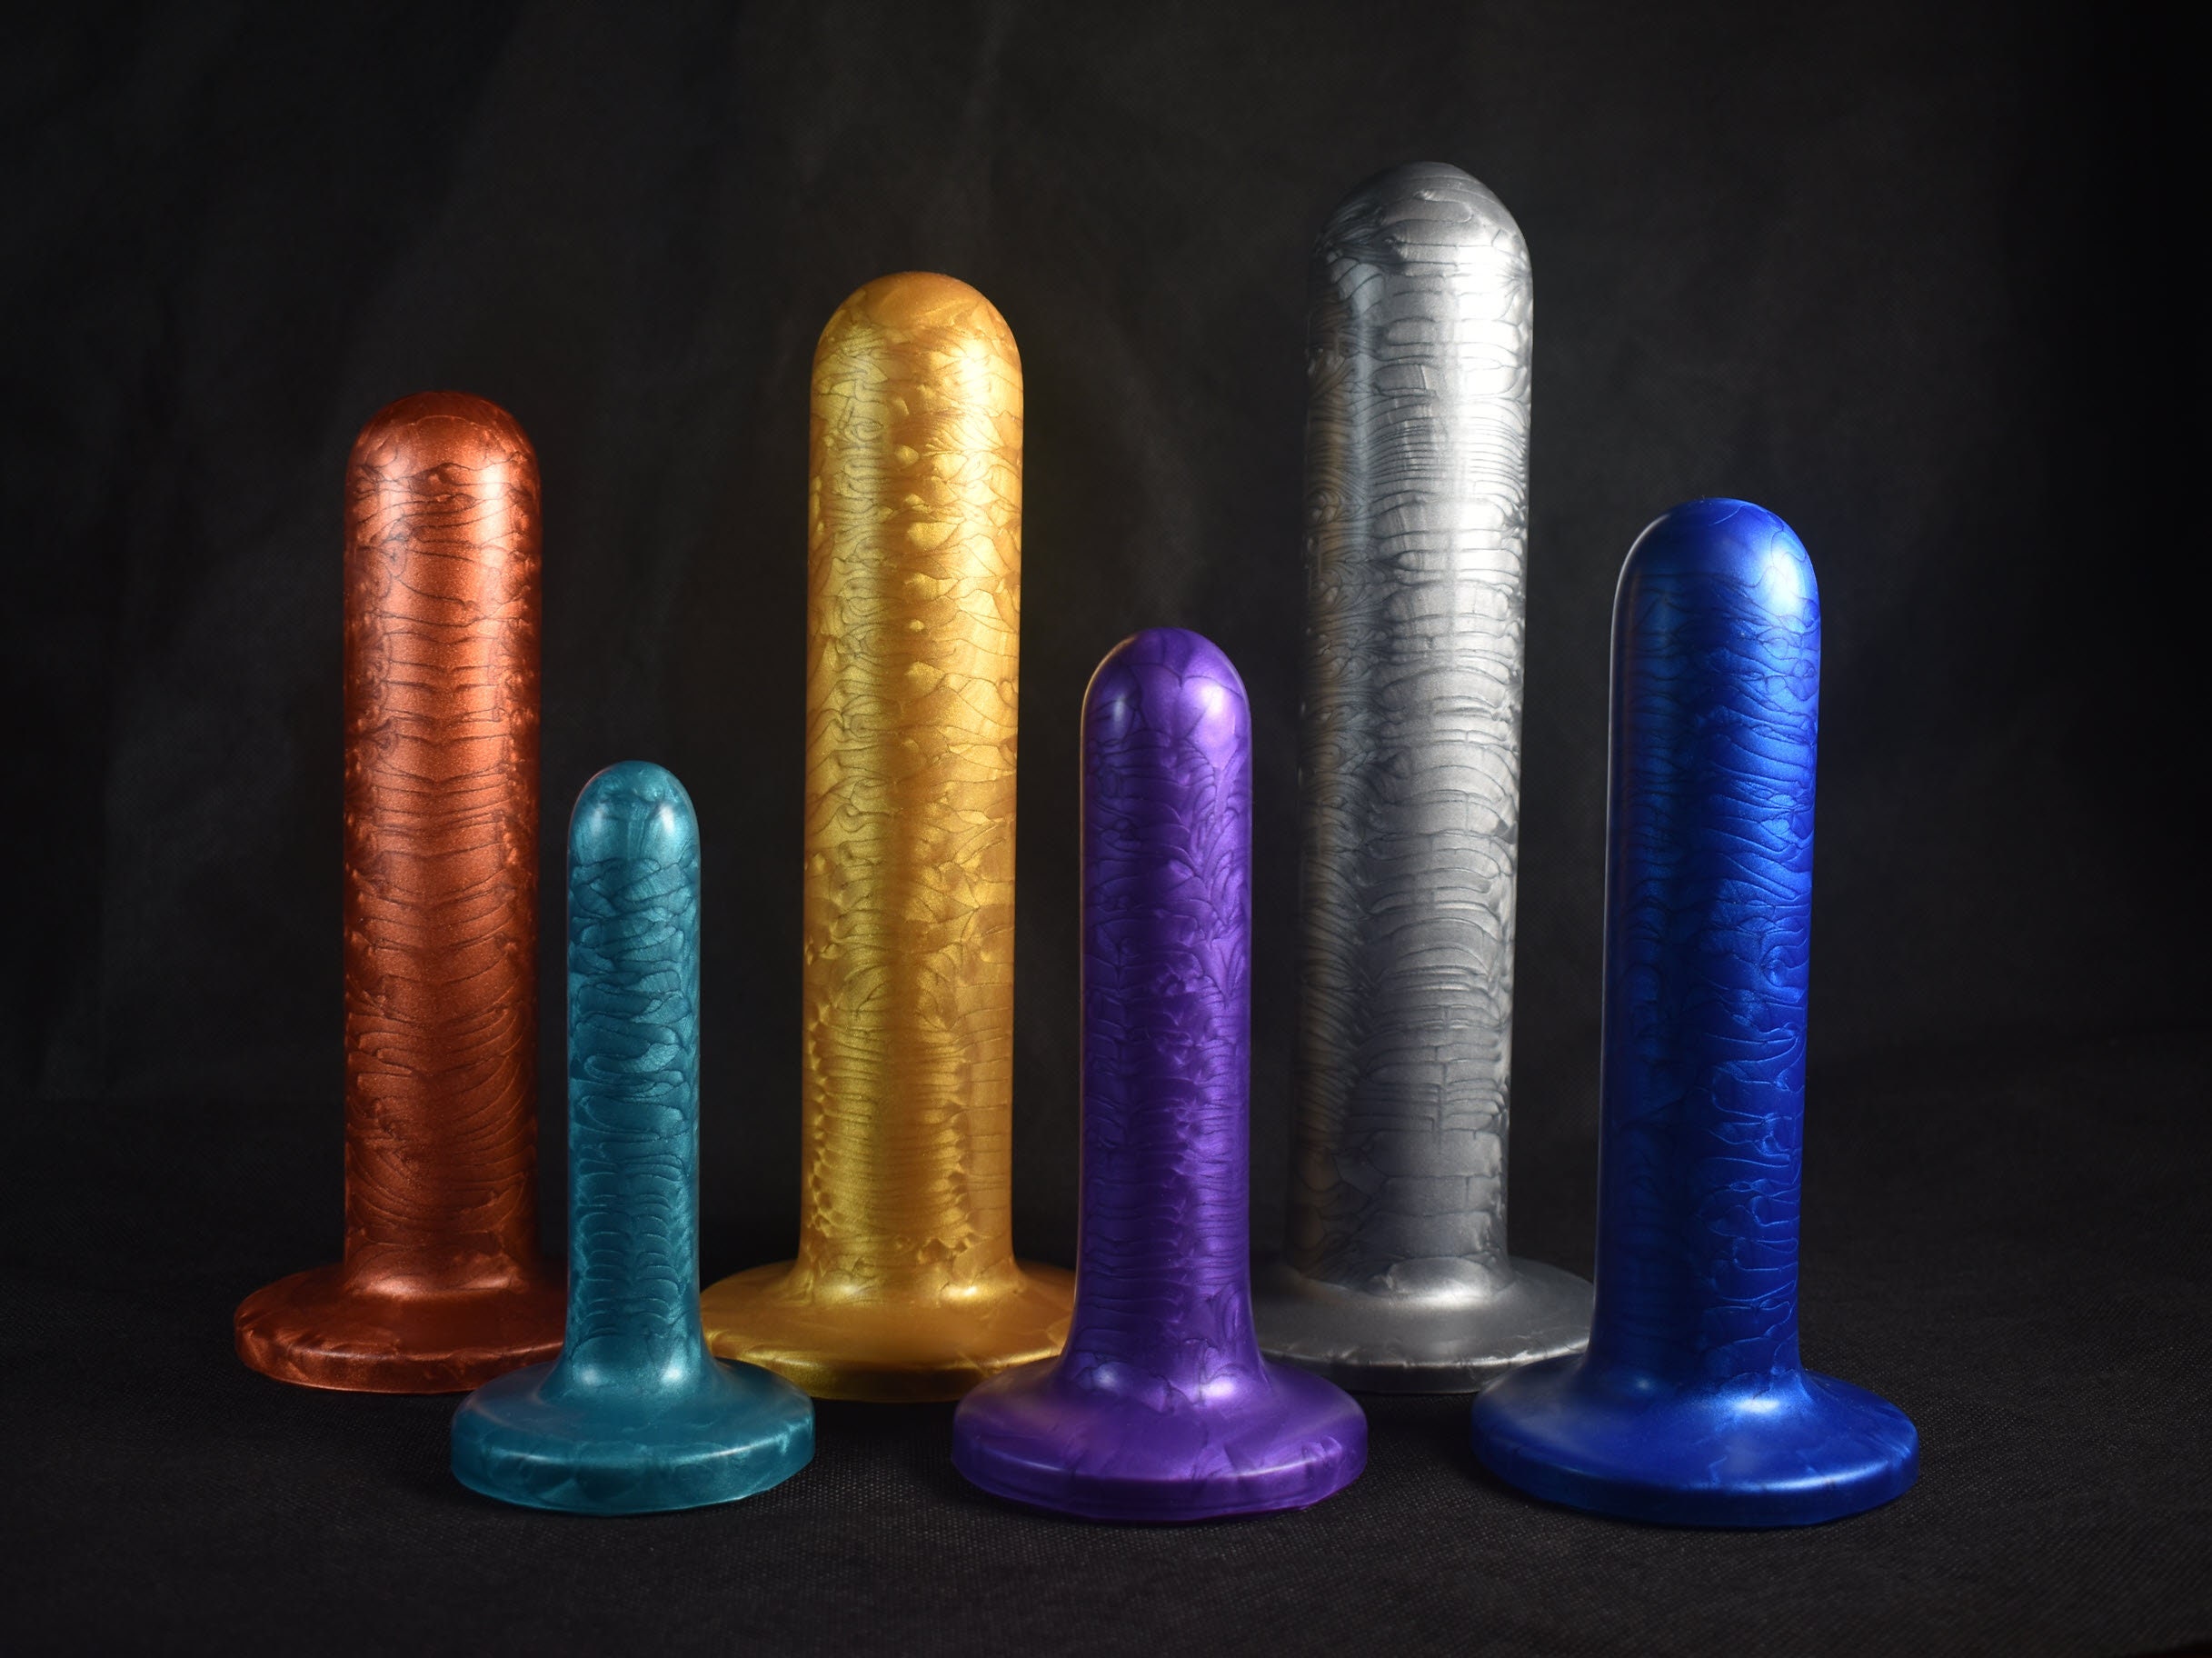 Hyper Sensitive Lineup Smooth and Blunt Silicone Dildo